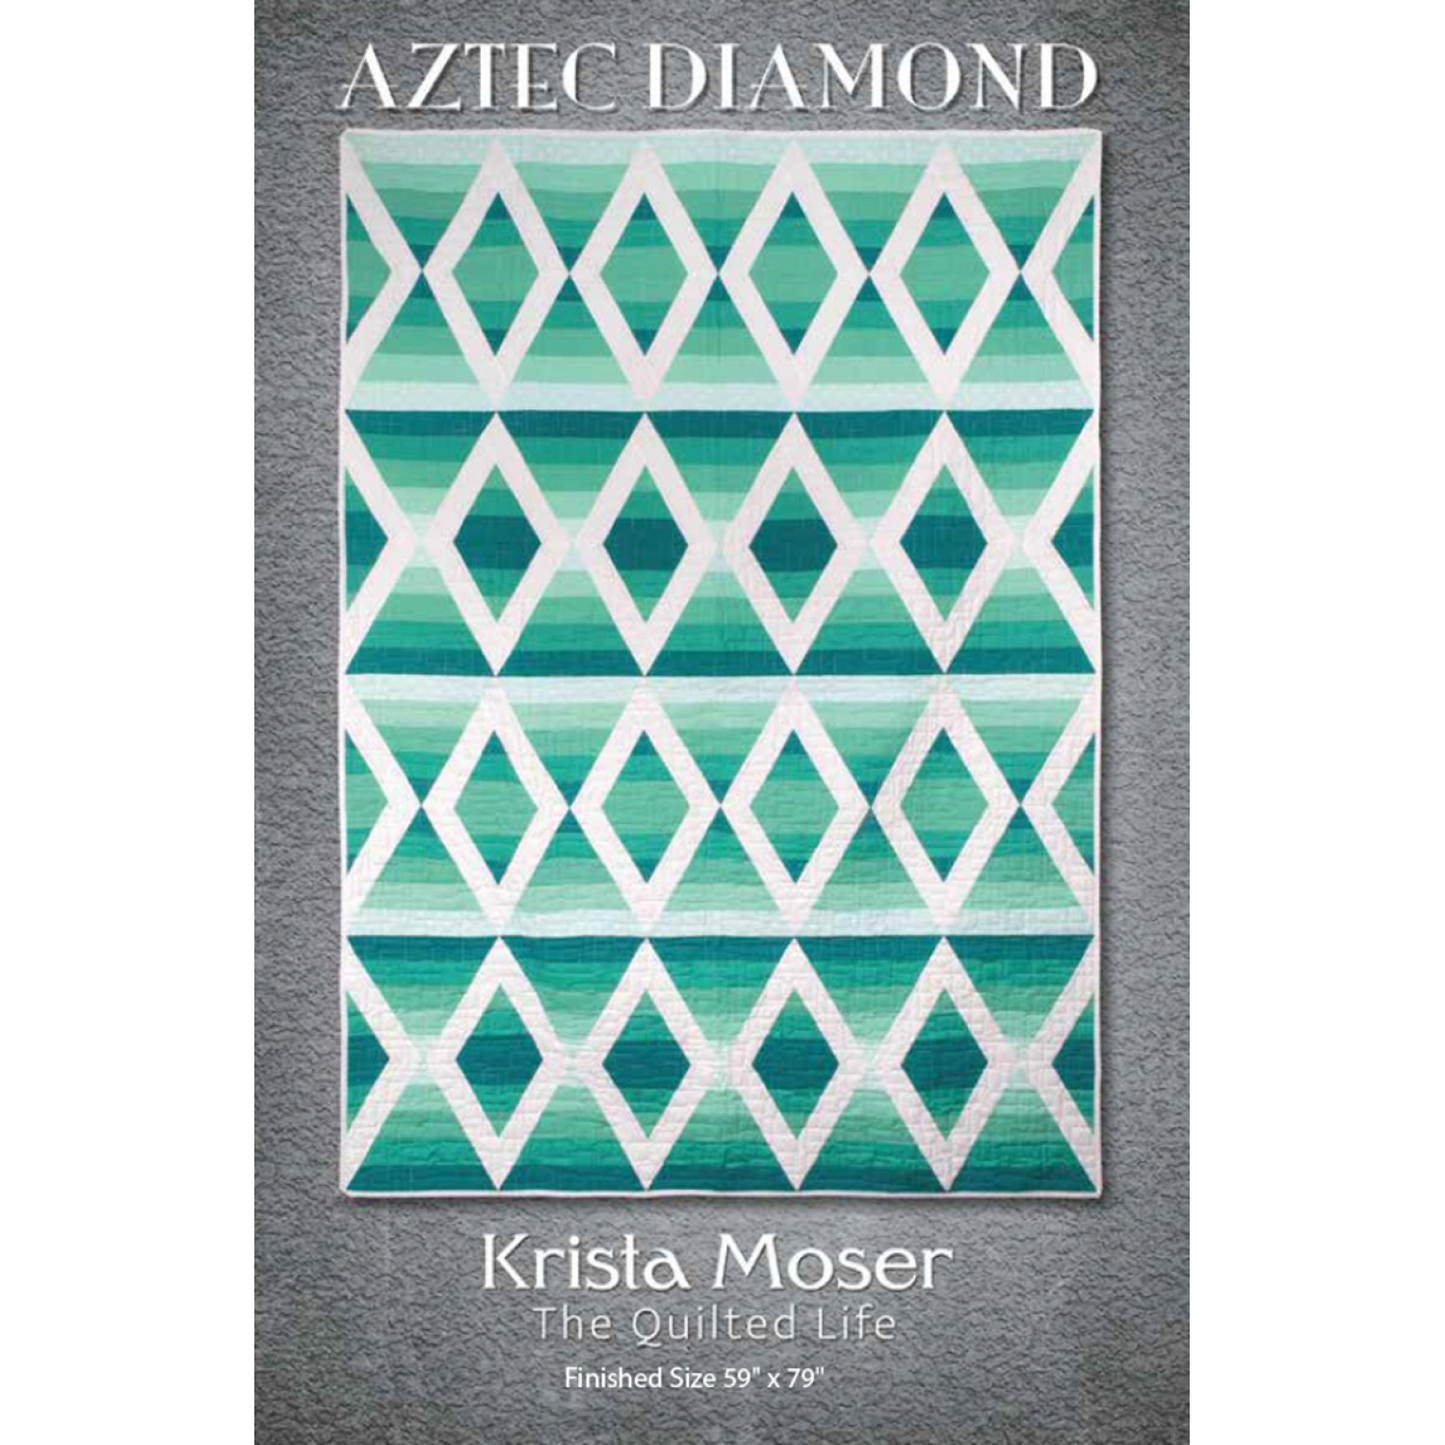 Aztec Diamond | The Quilted Life